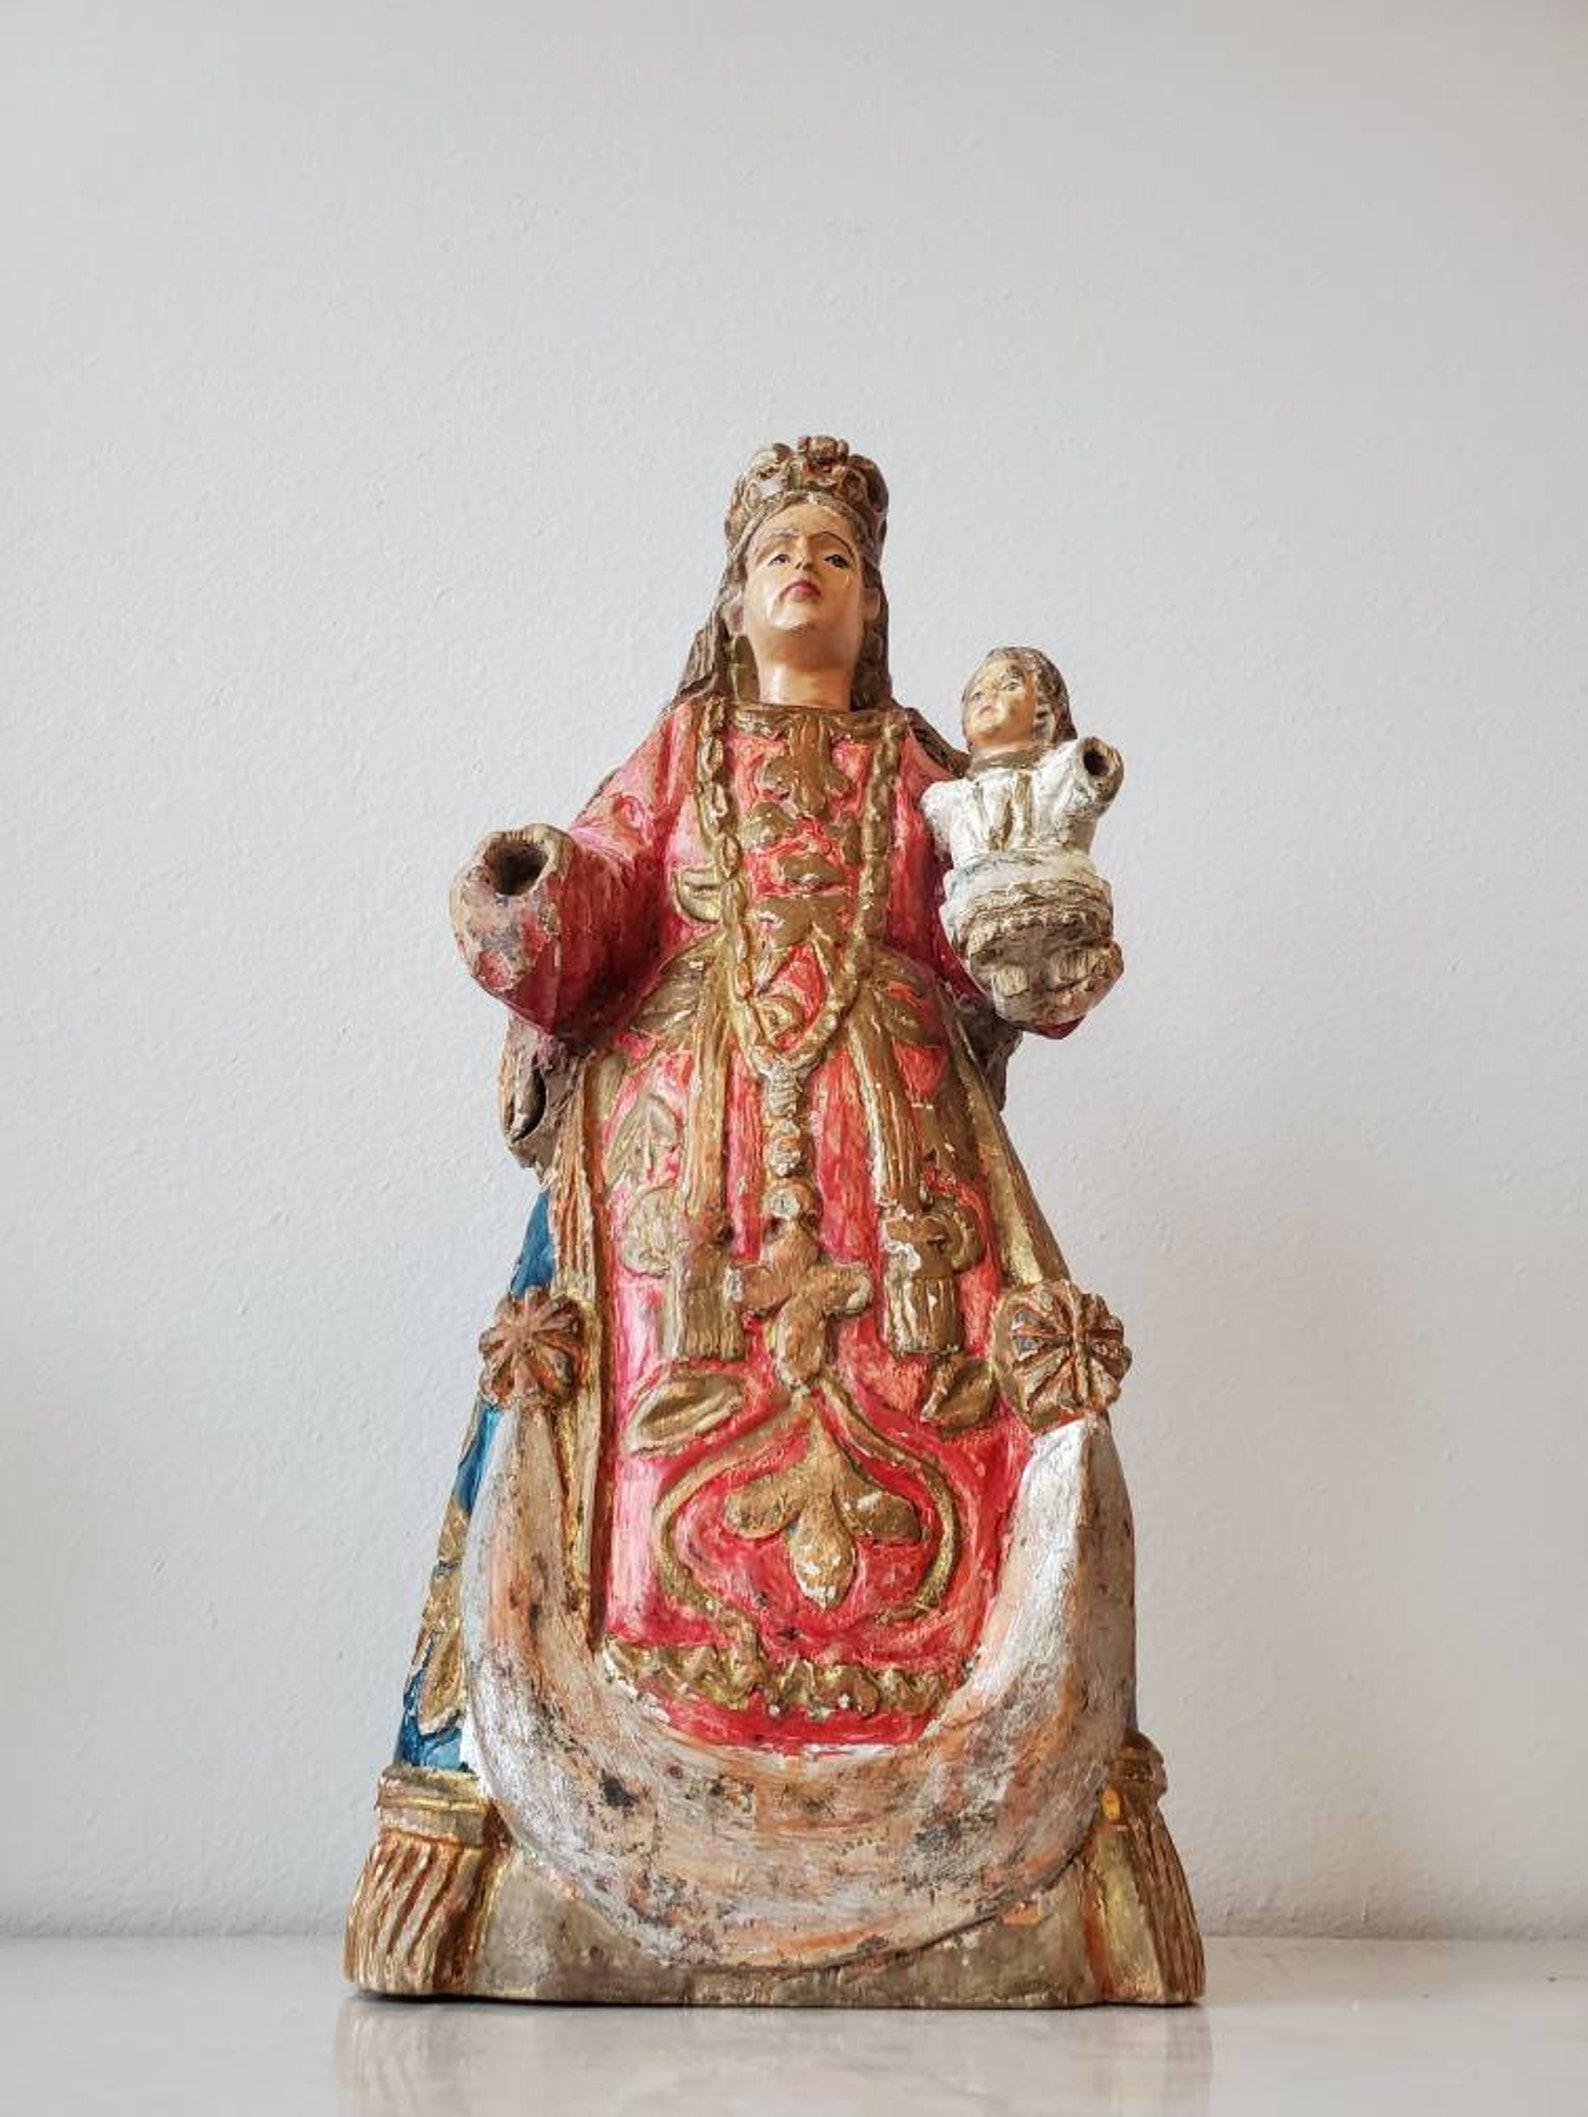 An exceptional example of Spanish Colonial style, born in Mexico in the 19th century, this large hand carved and painted santo religious folk art altar figure depicting 